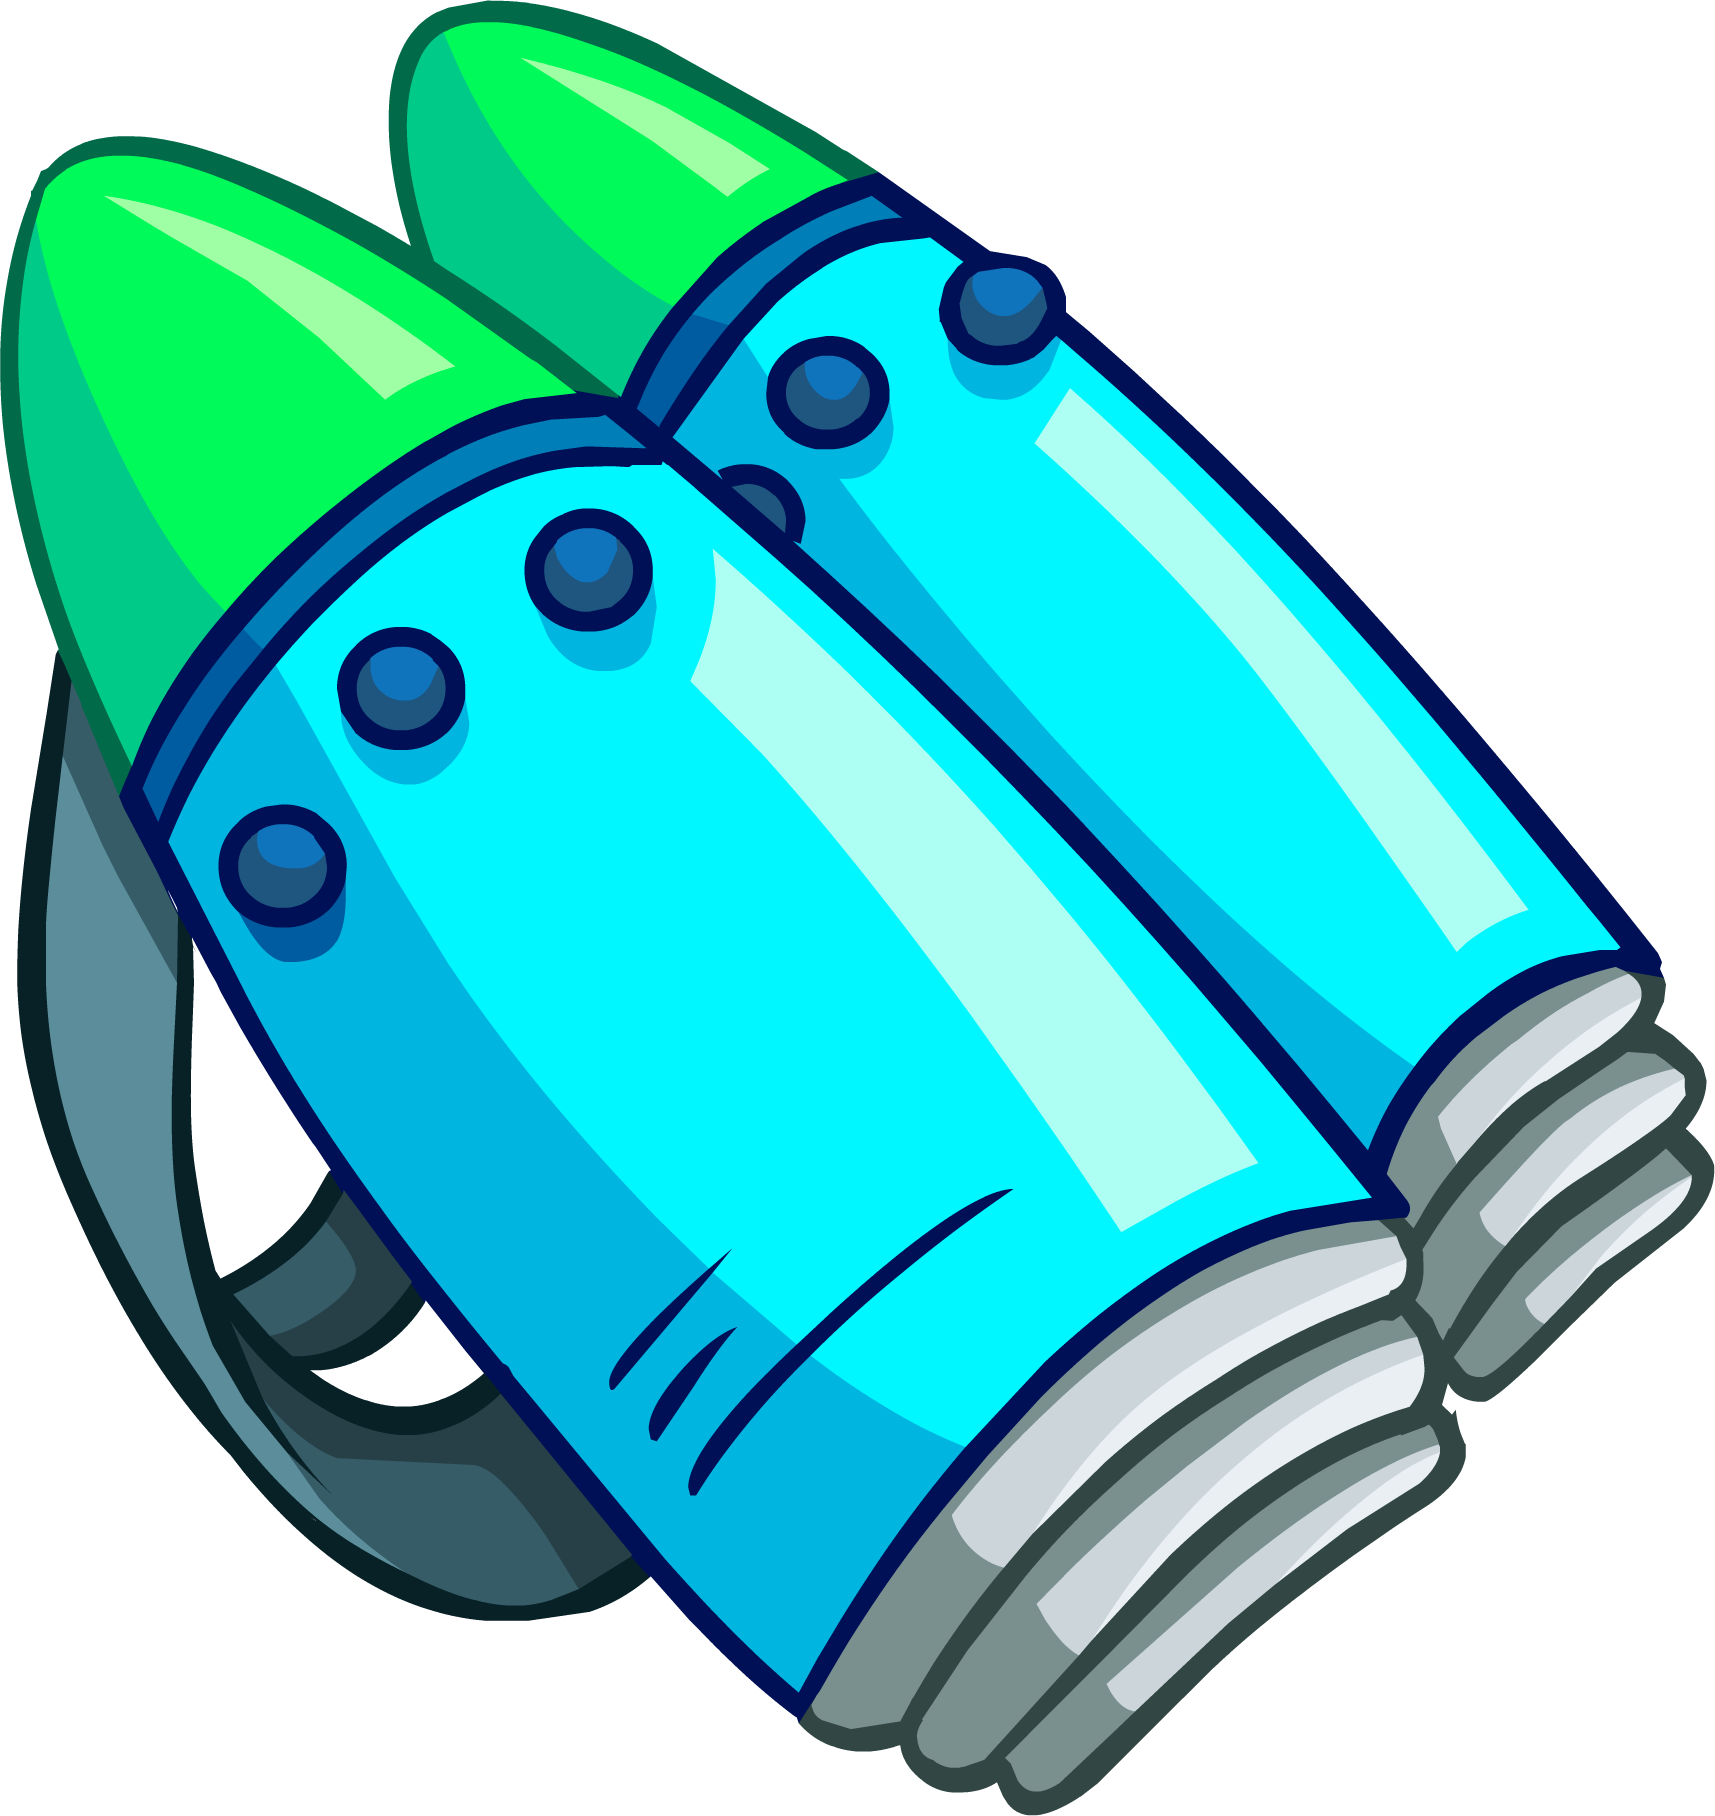 Jet Pack Icon Photos and Images